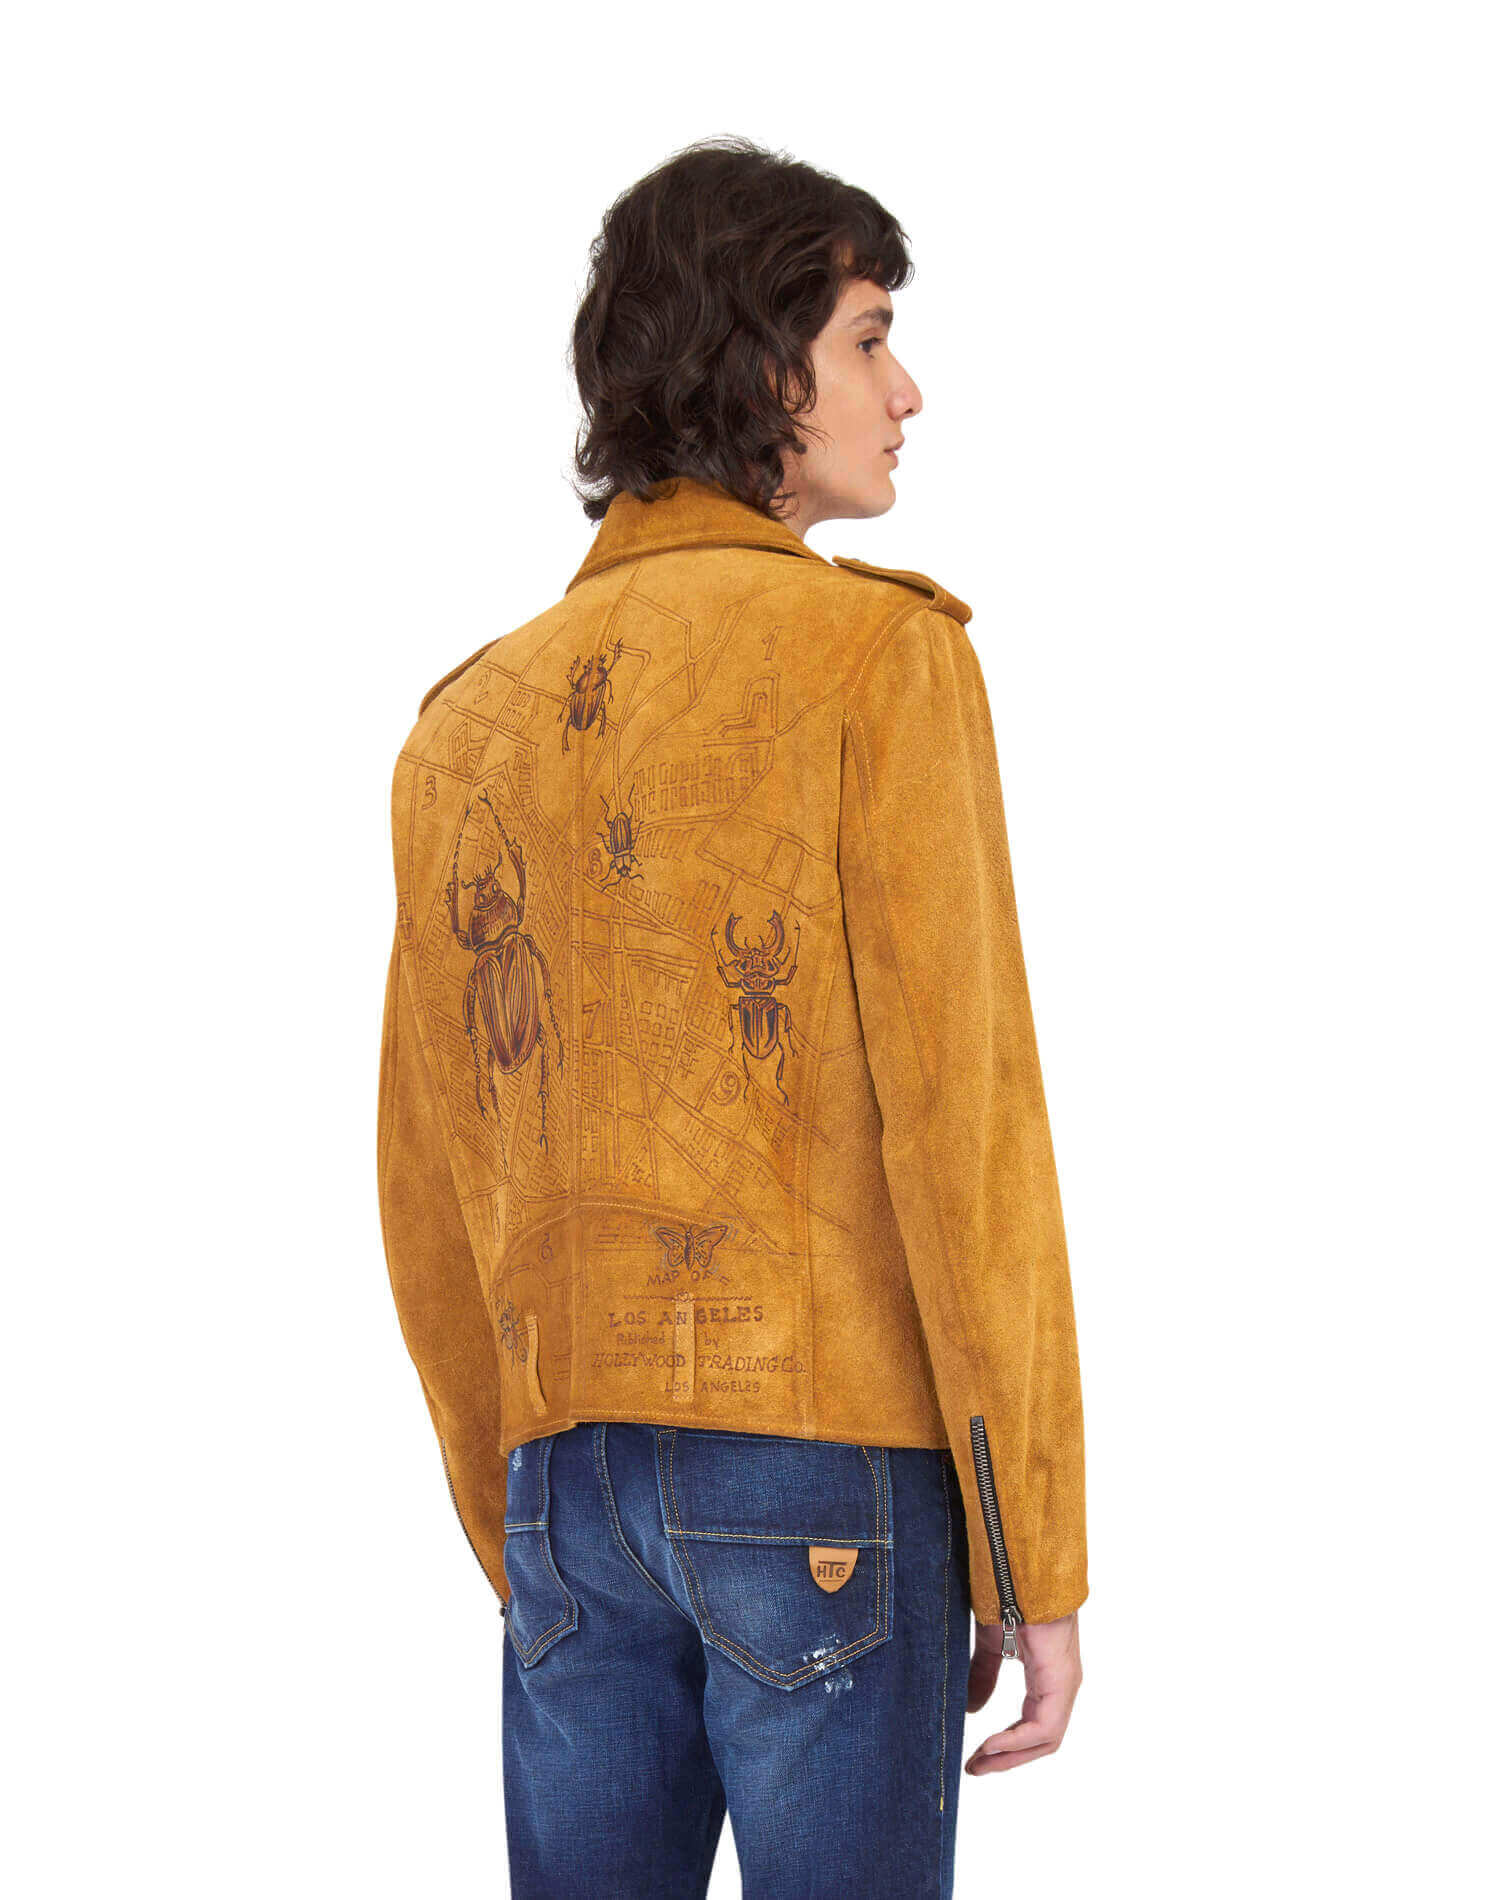 DUSTIN SUEDE L.A. JACKET Cognac suede jacket, asymmetrical zip closure. Three frontal pockets. Zipped sleeves. Hand-painted details on the back. Made in Italy. HTC LOS ANGELES